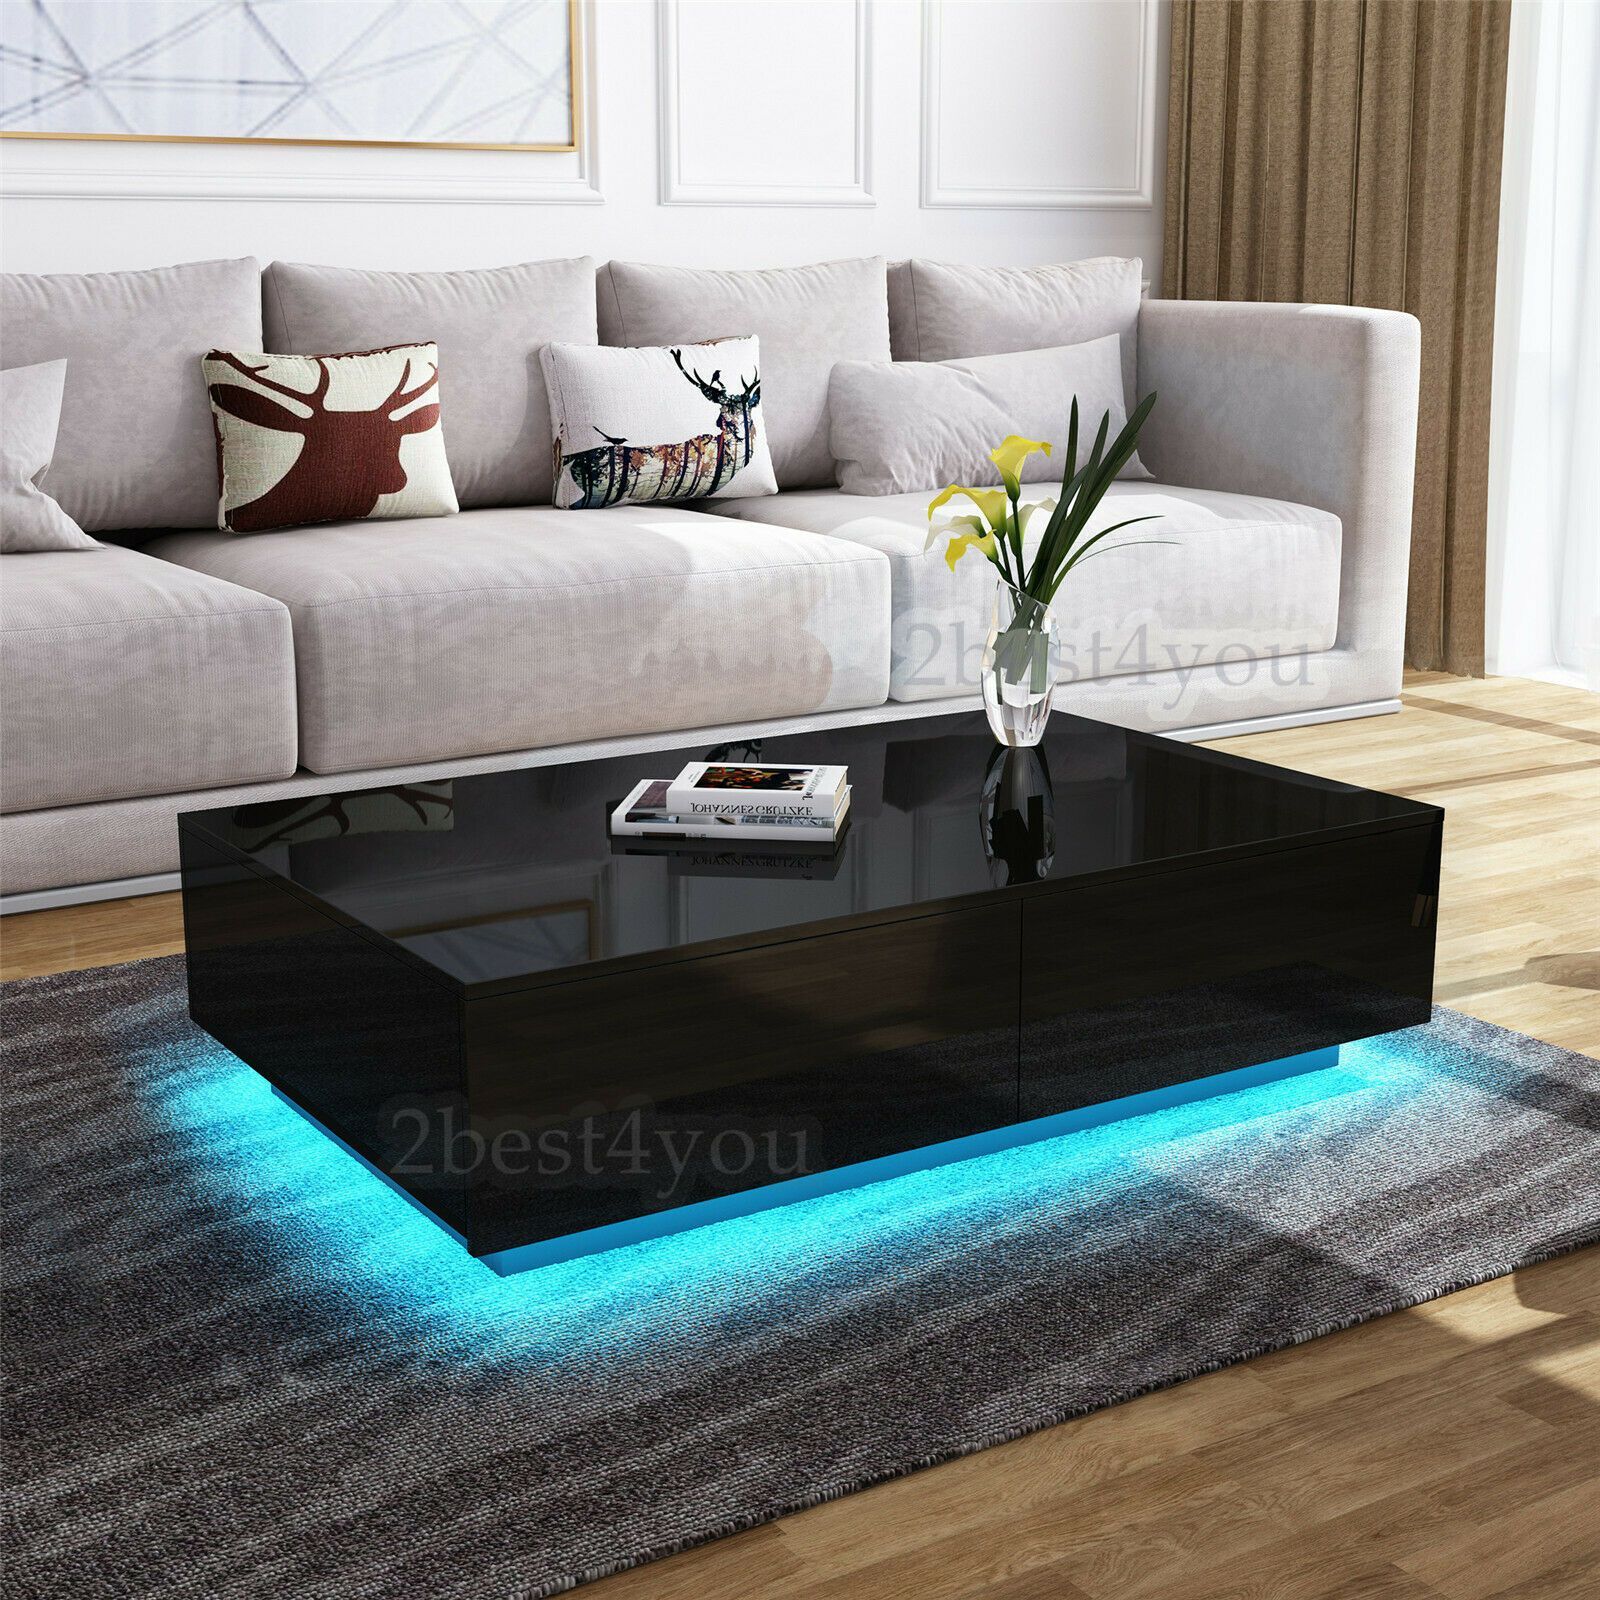 Modern Coffee Table With Led Lights – Stellabracy For Coffee Tables With Drawers And Led Lights (View 6 of 15)